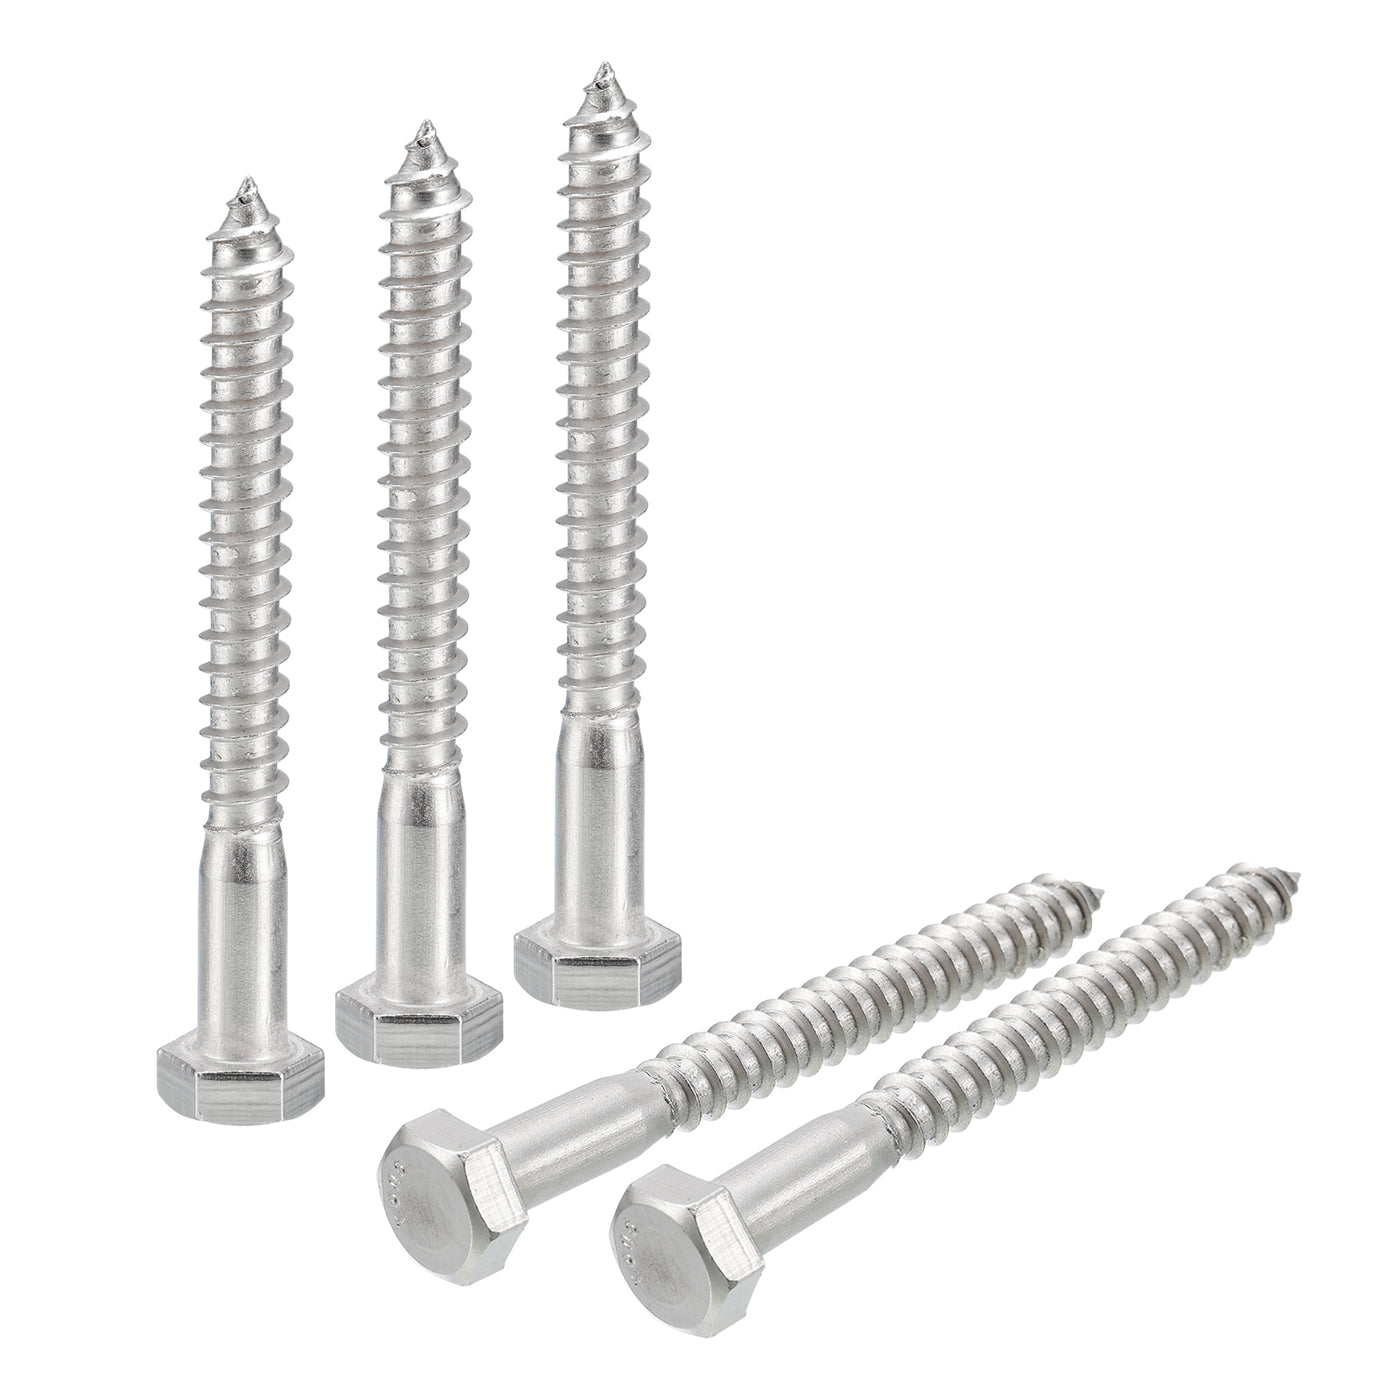 uxcell Uxcell Hex Head Lag Screws Bolts, 20pcs 5/16" x 3" 304 Stainless Steel Wood Screws